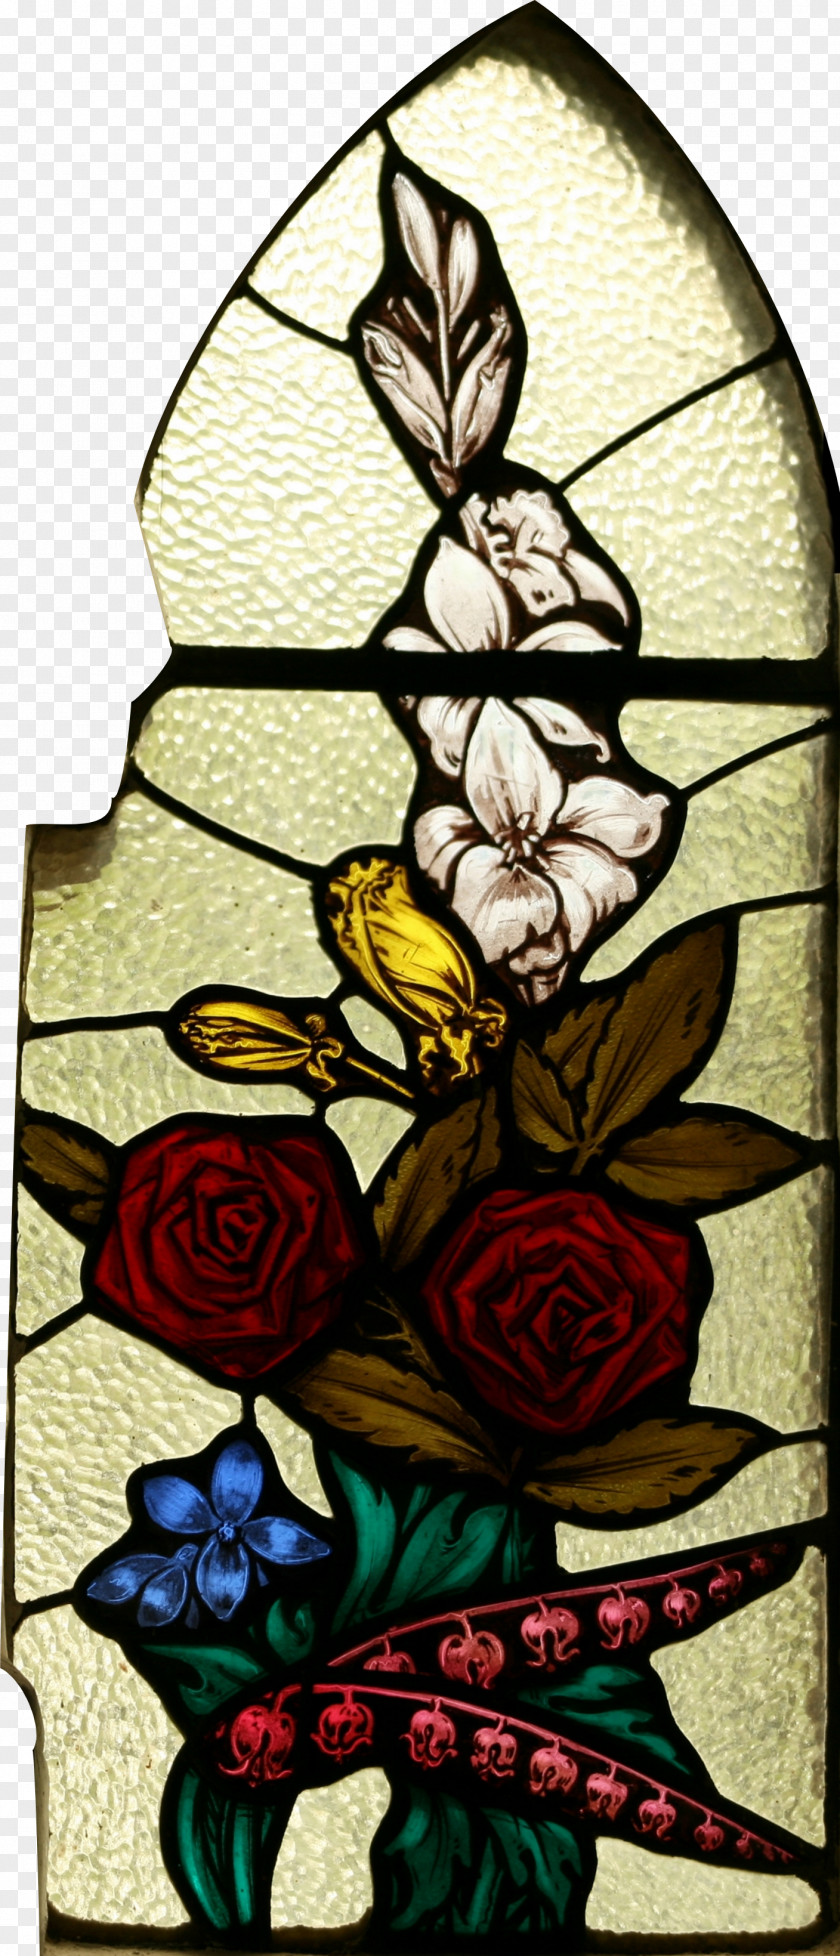 Flower Stained Glass Window PNG